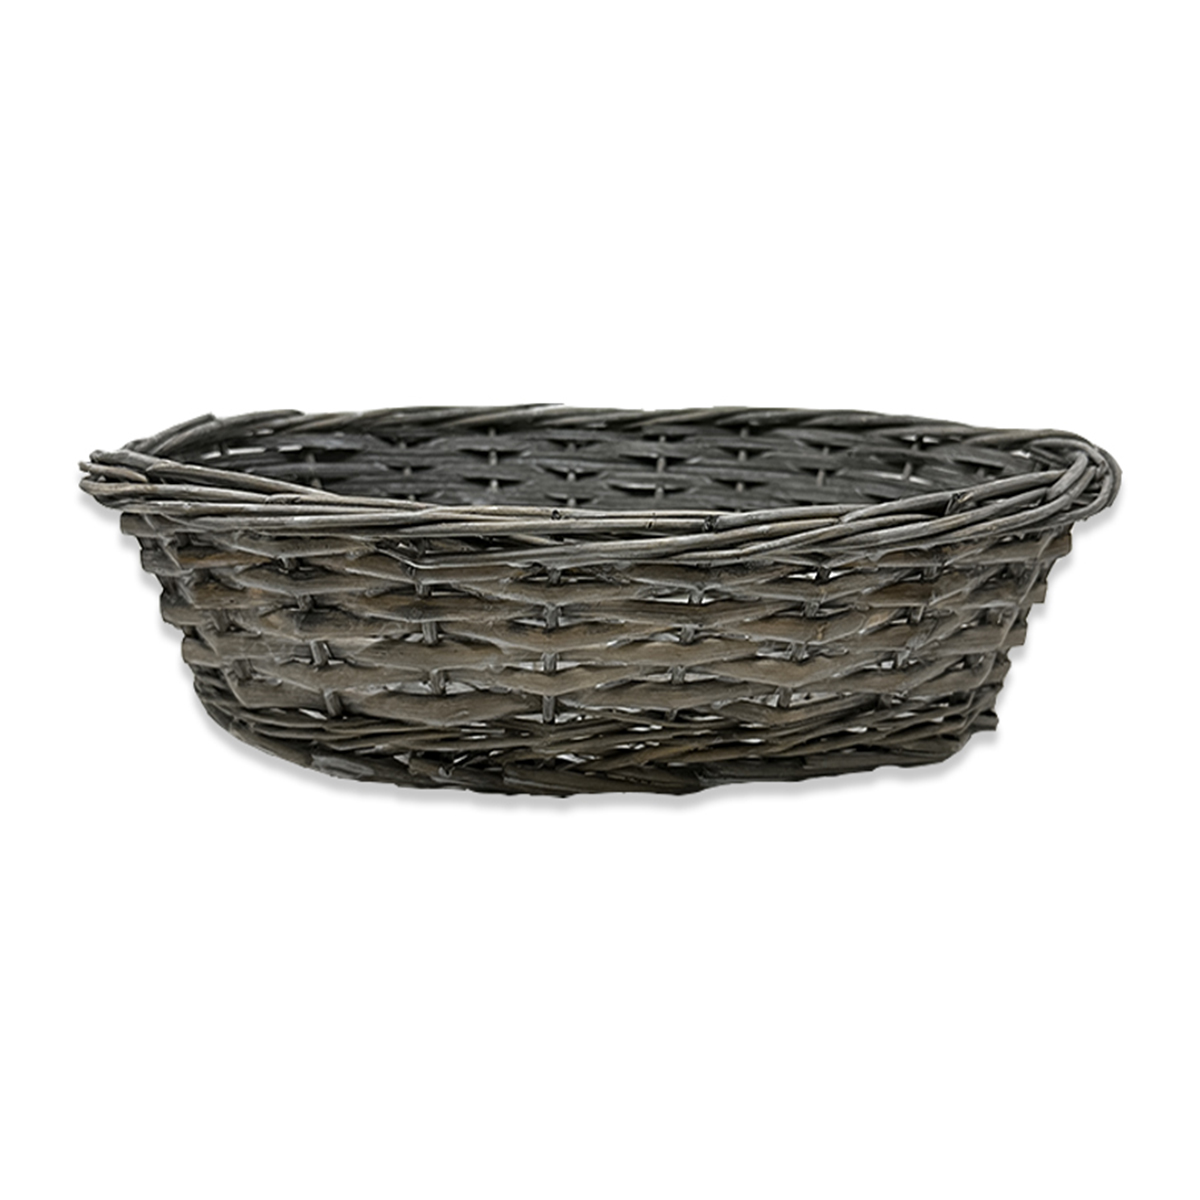 Avery Antique Gray Stain Oblong Tray Basket 14in